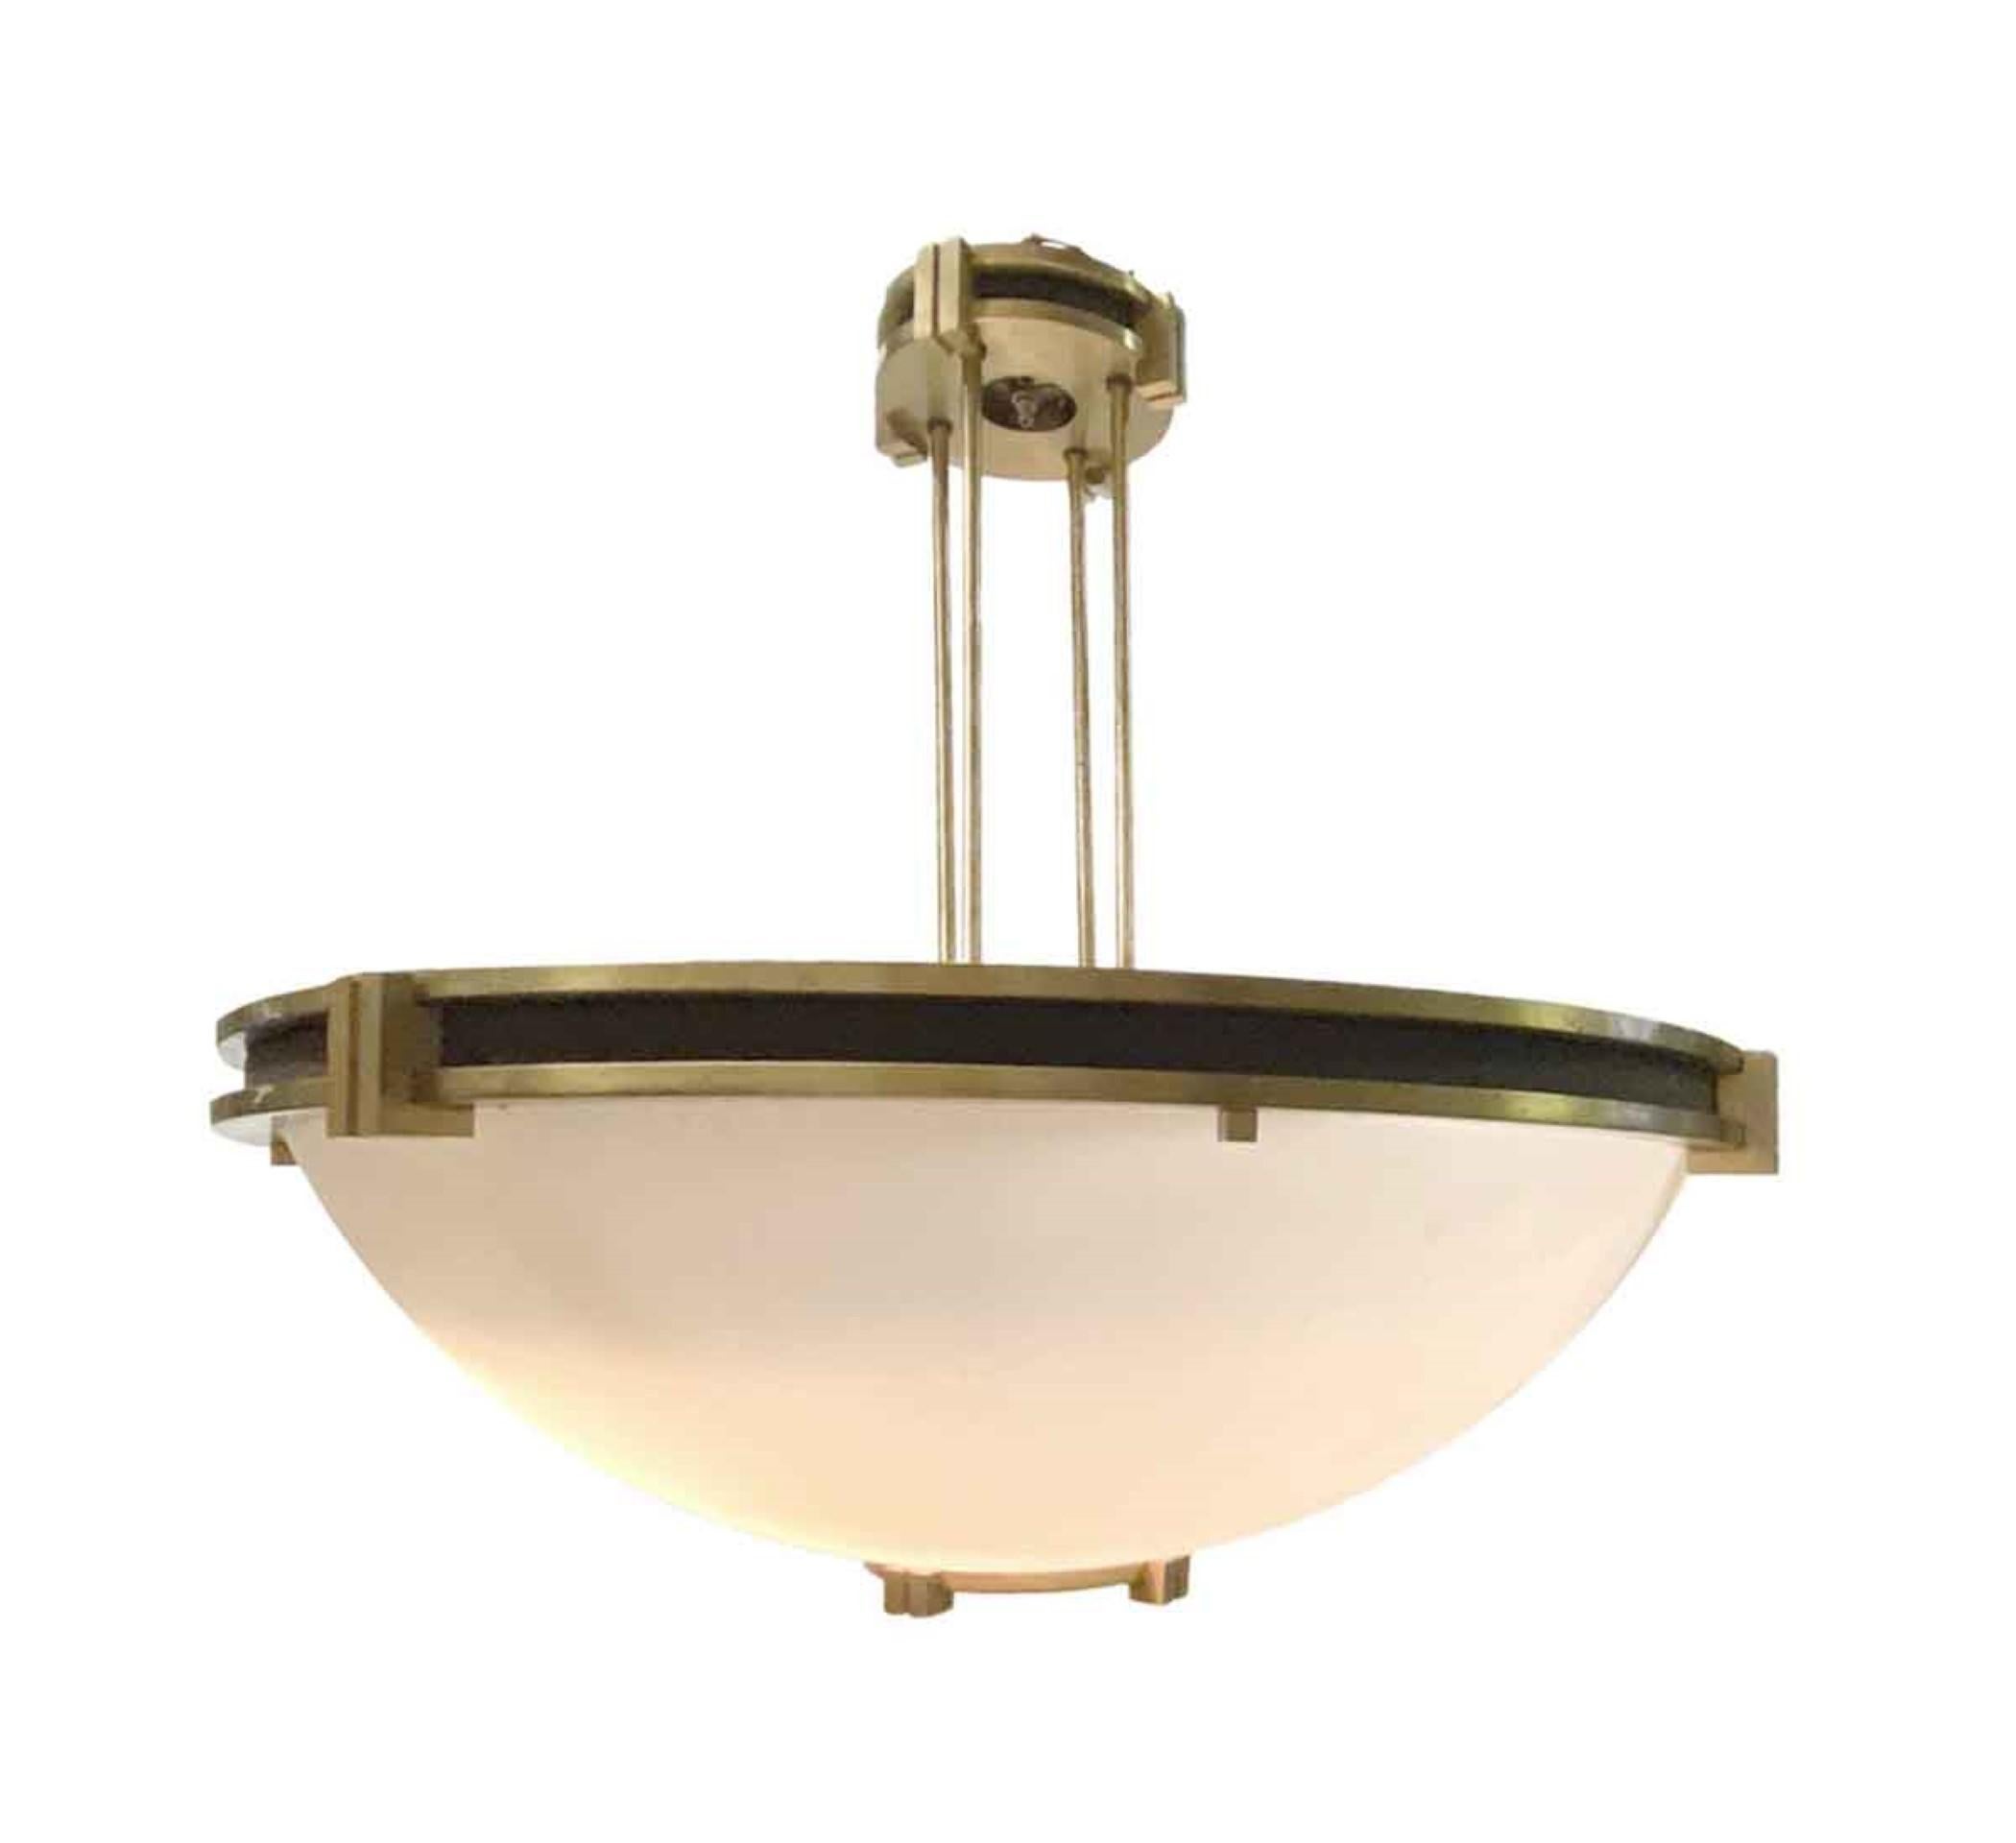 1950s Art Deco pendant dish light blending a geometric Art Deco influence as well. Features details in brass and black finishes topped off with an acrylic shade. From a bank in Manhattan. Takes eight standard light bulbs. This can be seen at our 400